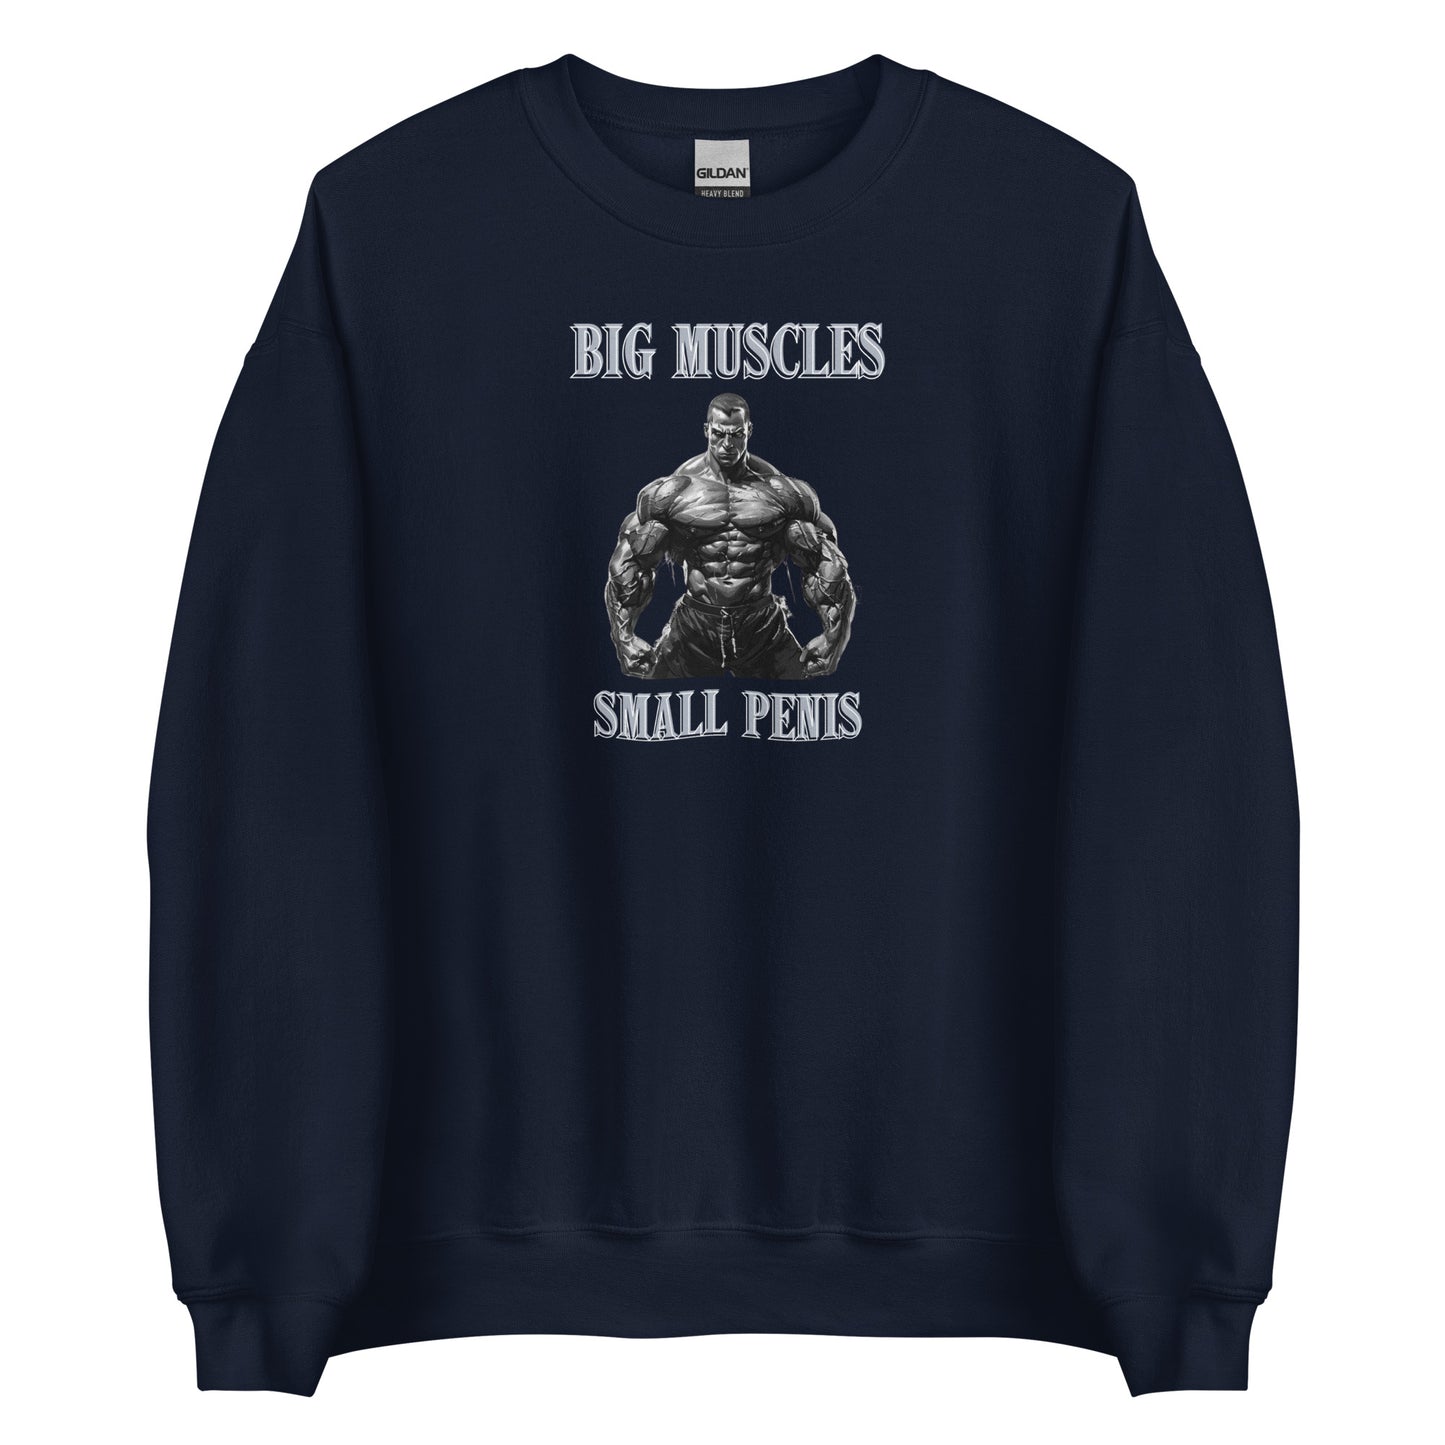 BIG MUSCLES, SMALL PENIS